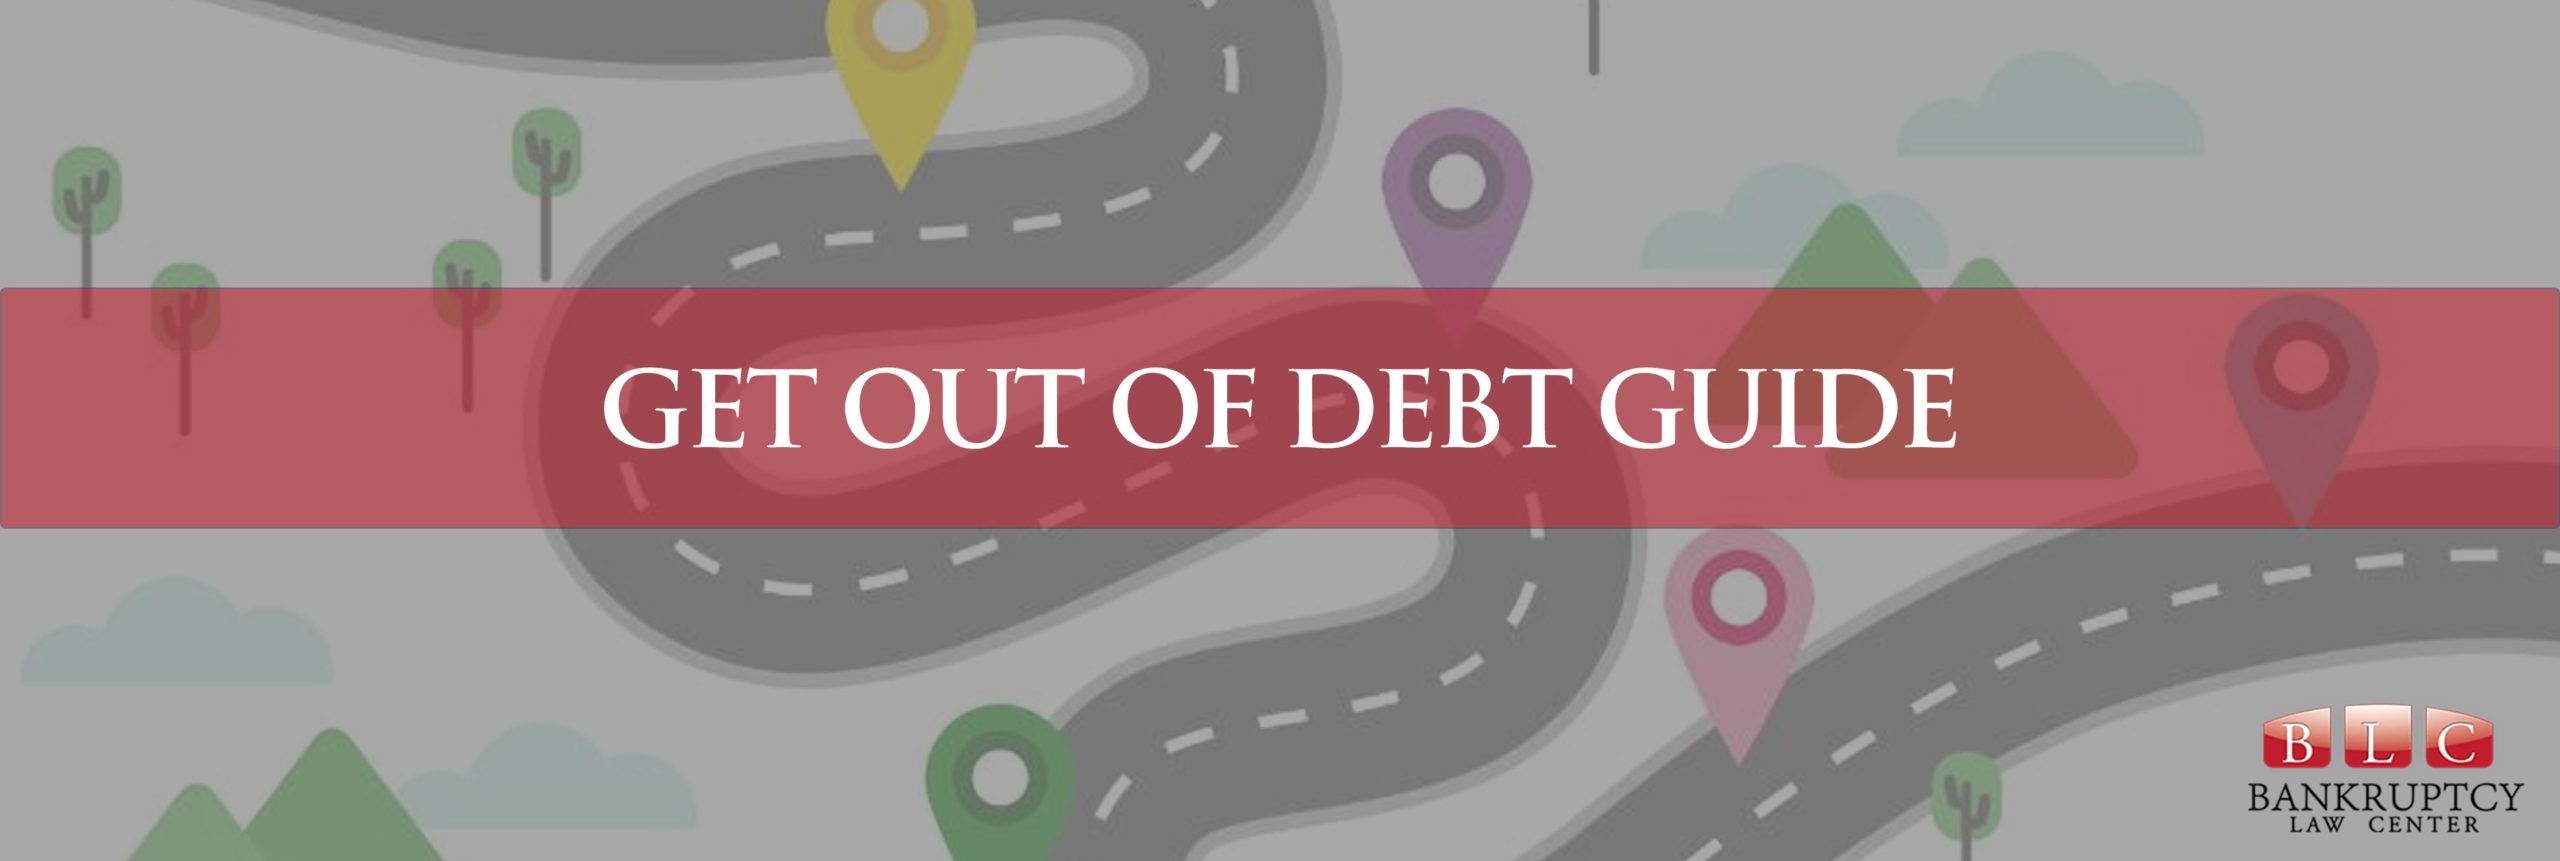 Get Out of Debt Guide